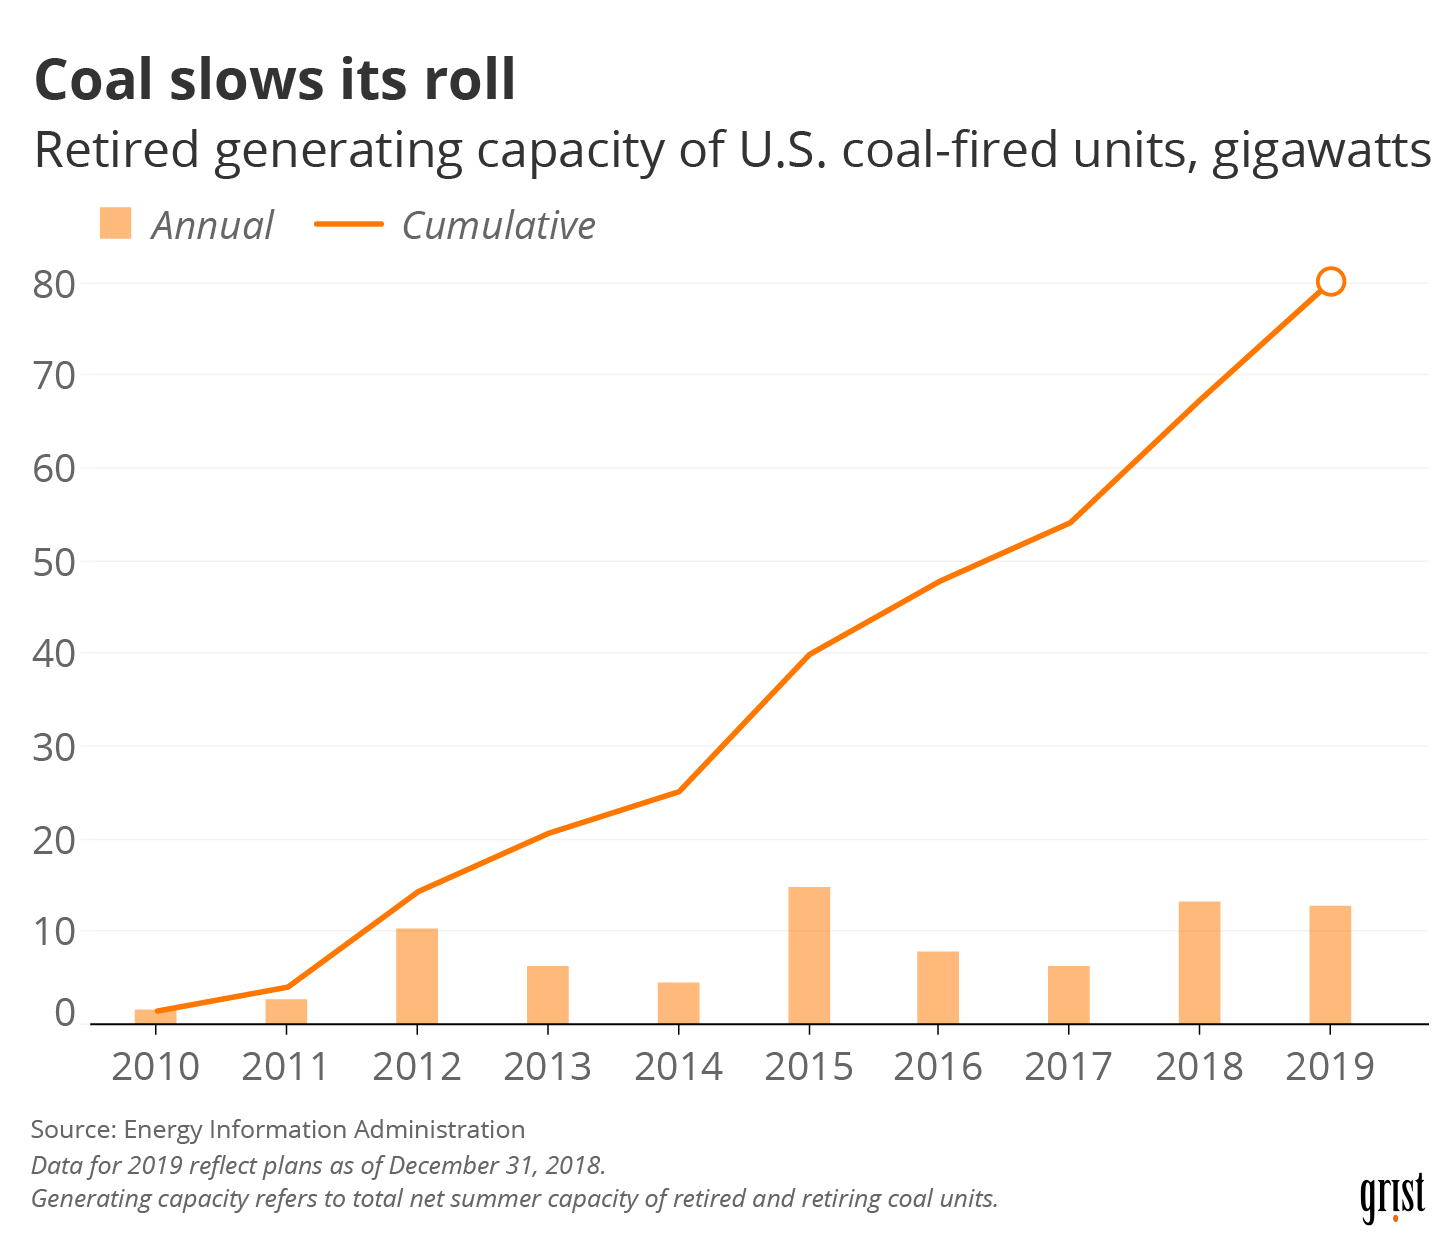 A line chart showing cumulative retired coal capacity in the United States between 2010 and 2019